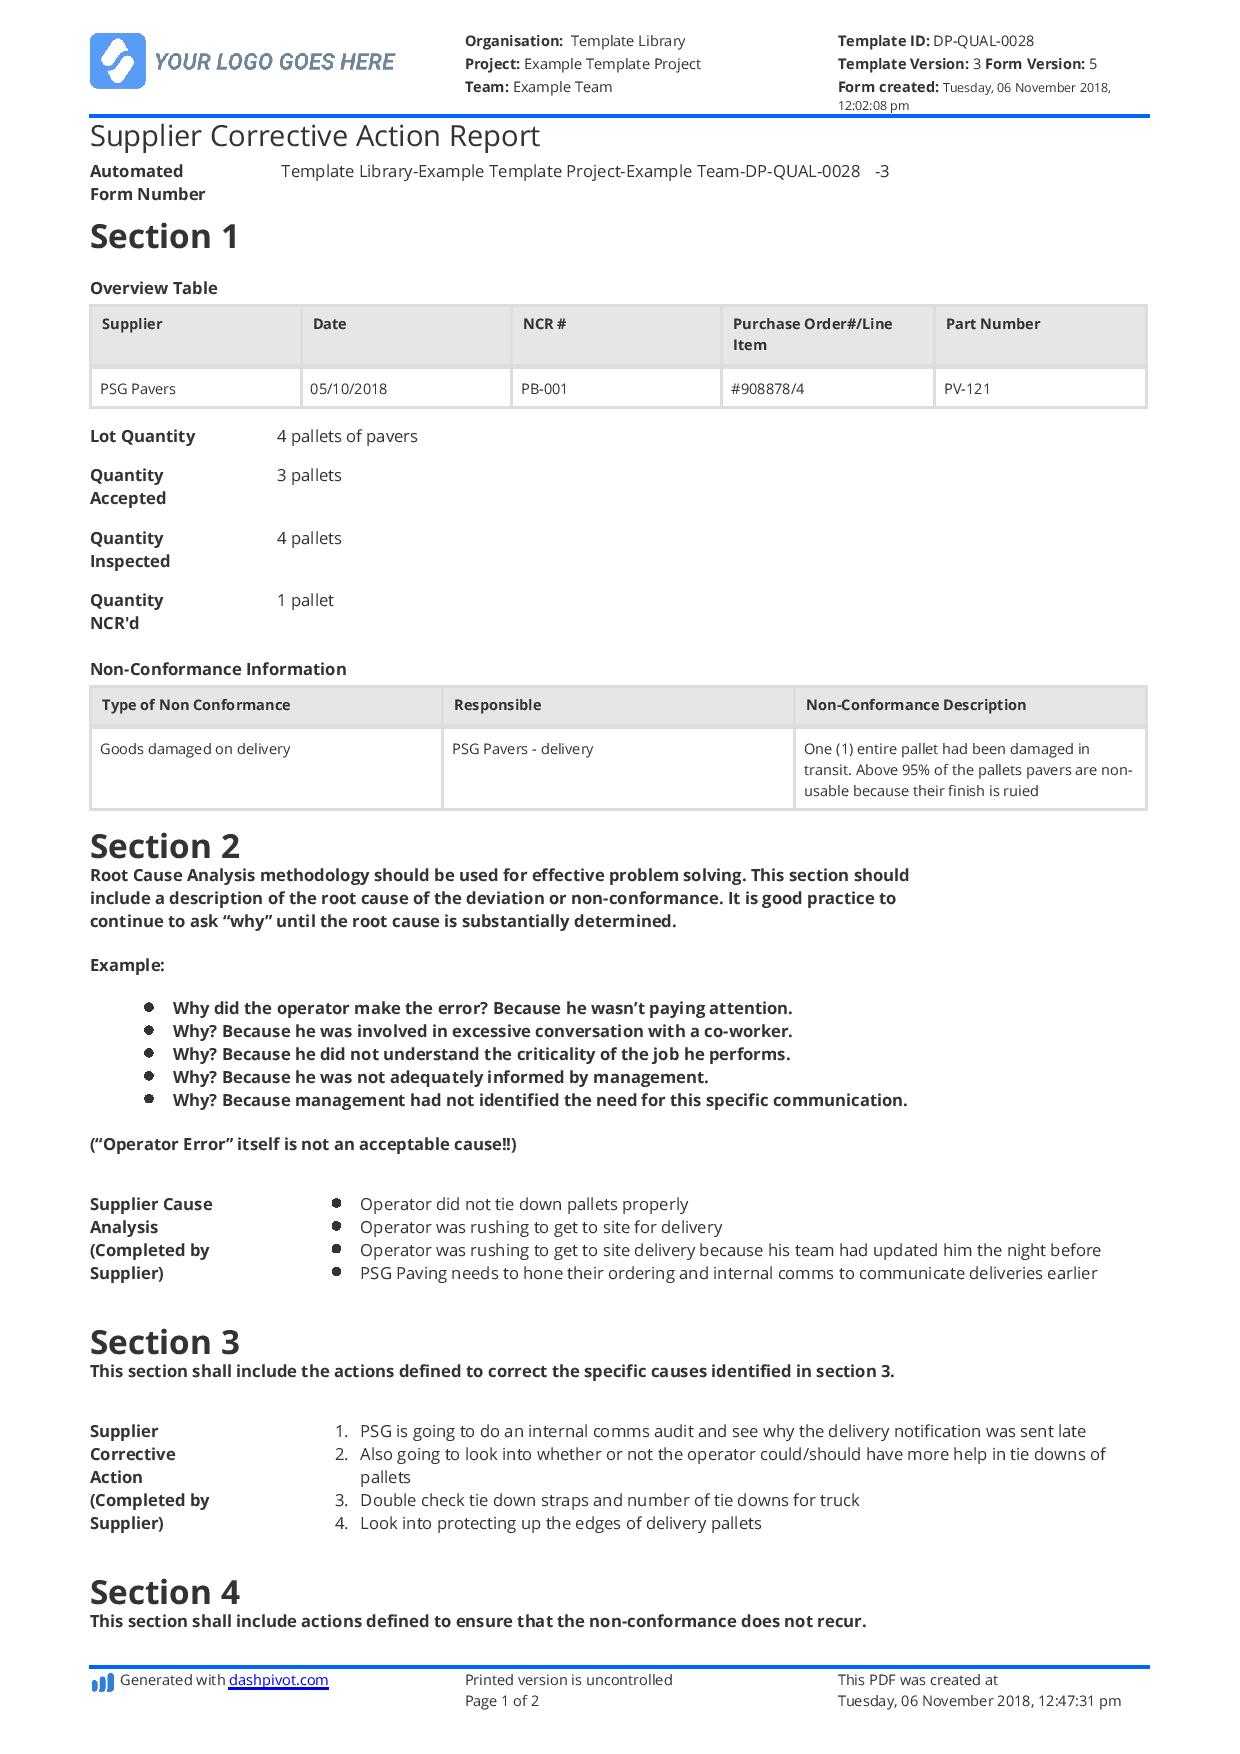 Supplier Corrective Action Report Template: Improve Your Inside Check Out Report Template